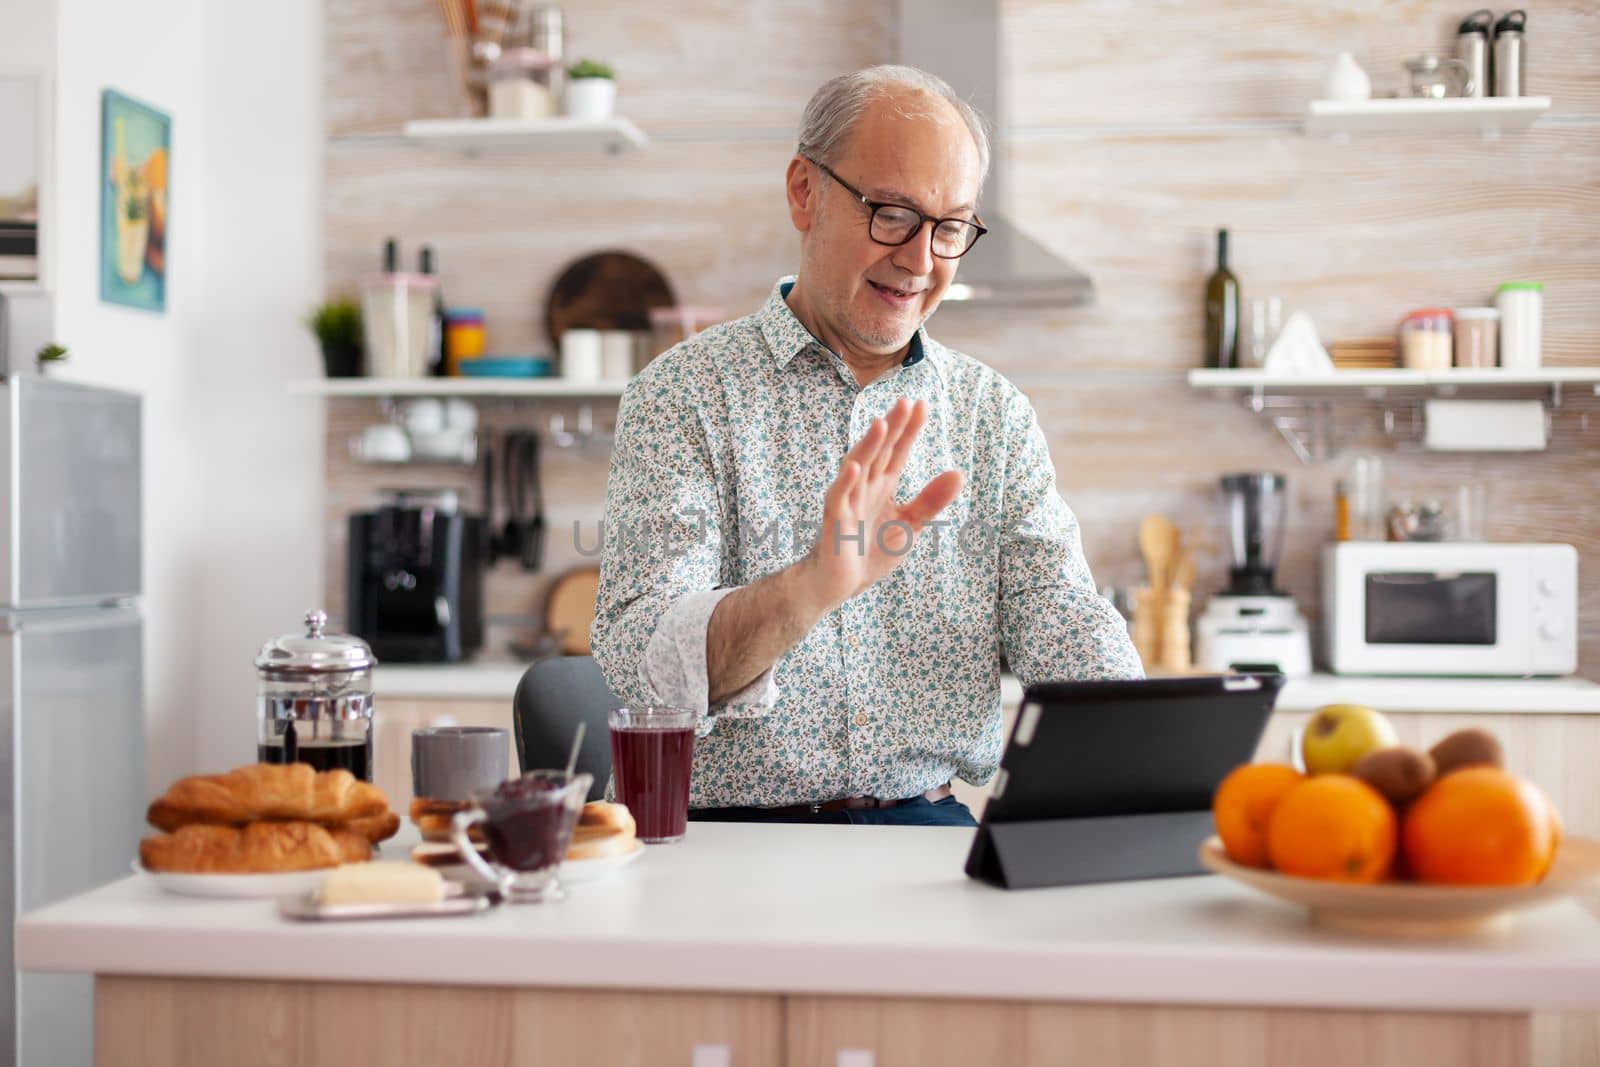 Mature man waving while having a conversation during video call in kitchen enjoying breakfast. Elderly person using internet online chat technology, tablet webcam for virtual conference call